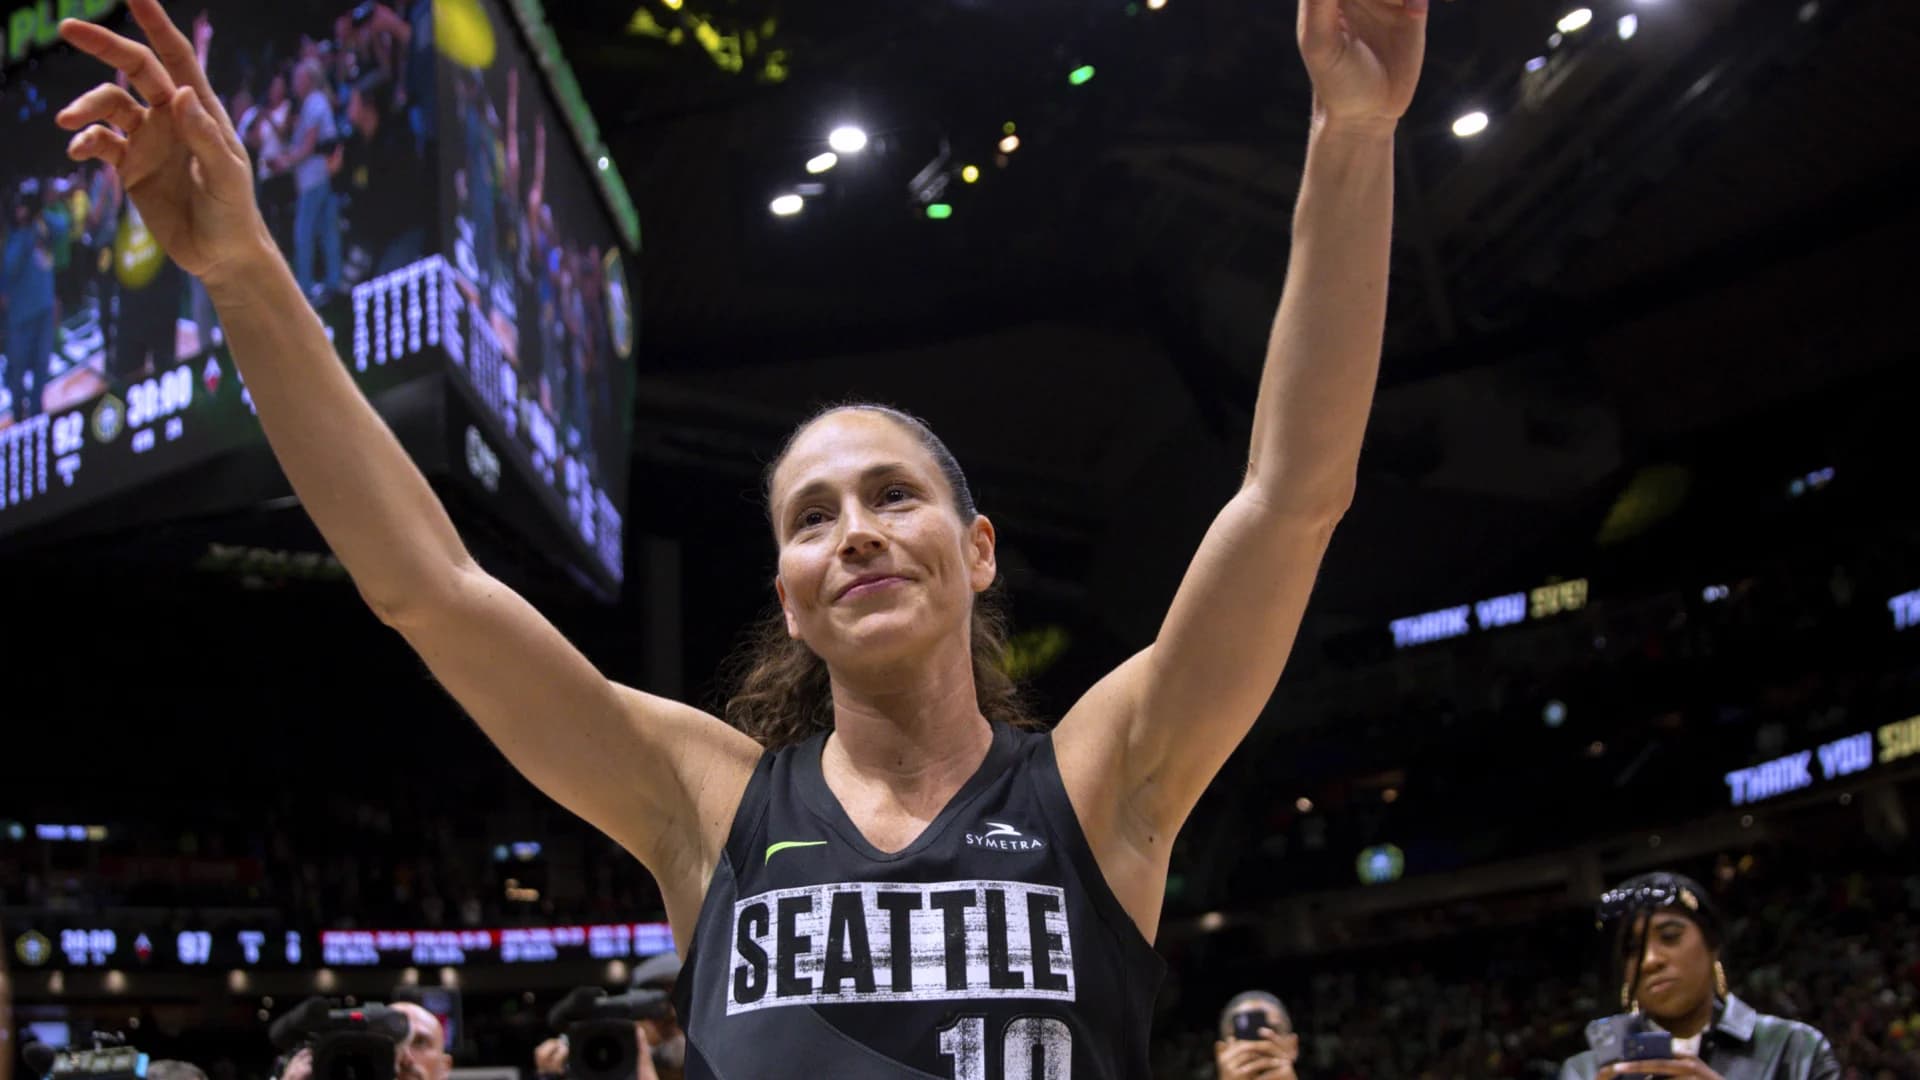 Sue Bird's career ends as Aces top Storm to reach to Finals